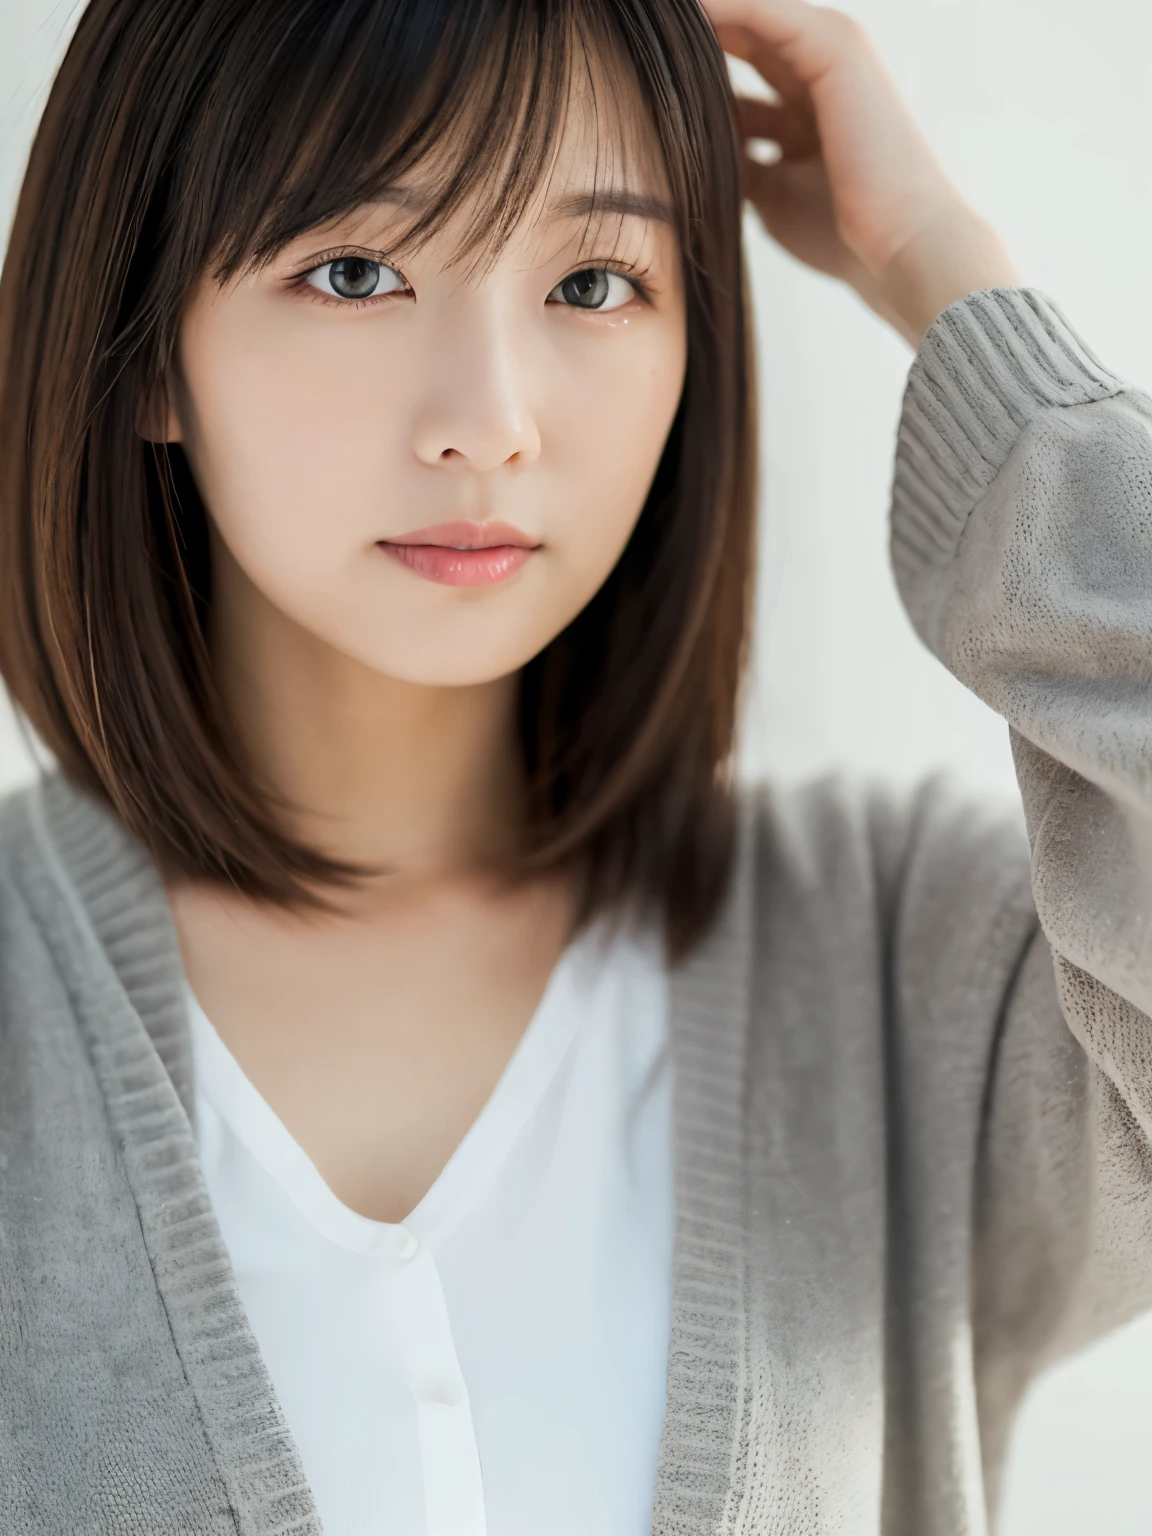 ((masutepiece,top-quality)), (photographrealistic:1.4),((masutepiece,8K)),hight resolution,Studio Soft Light, Rim Lights, vibrant detail, realistic skin textures,Japanese, 1 beautiful woman, Short hair, Wave hair, faint thin bangs, make - up, 38 years, Detailed skin, cardigan, wide-leg pants, White background, White Room,white walls, fully body photo, Looking at Viewer